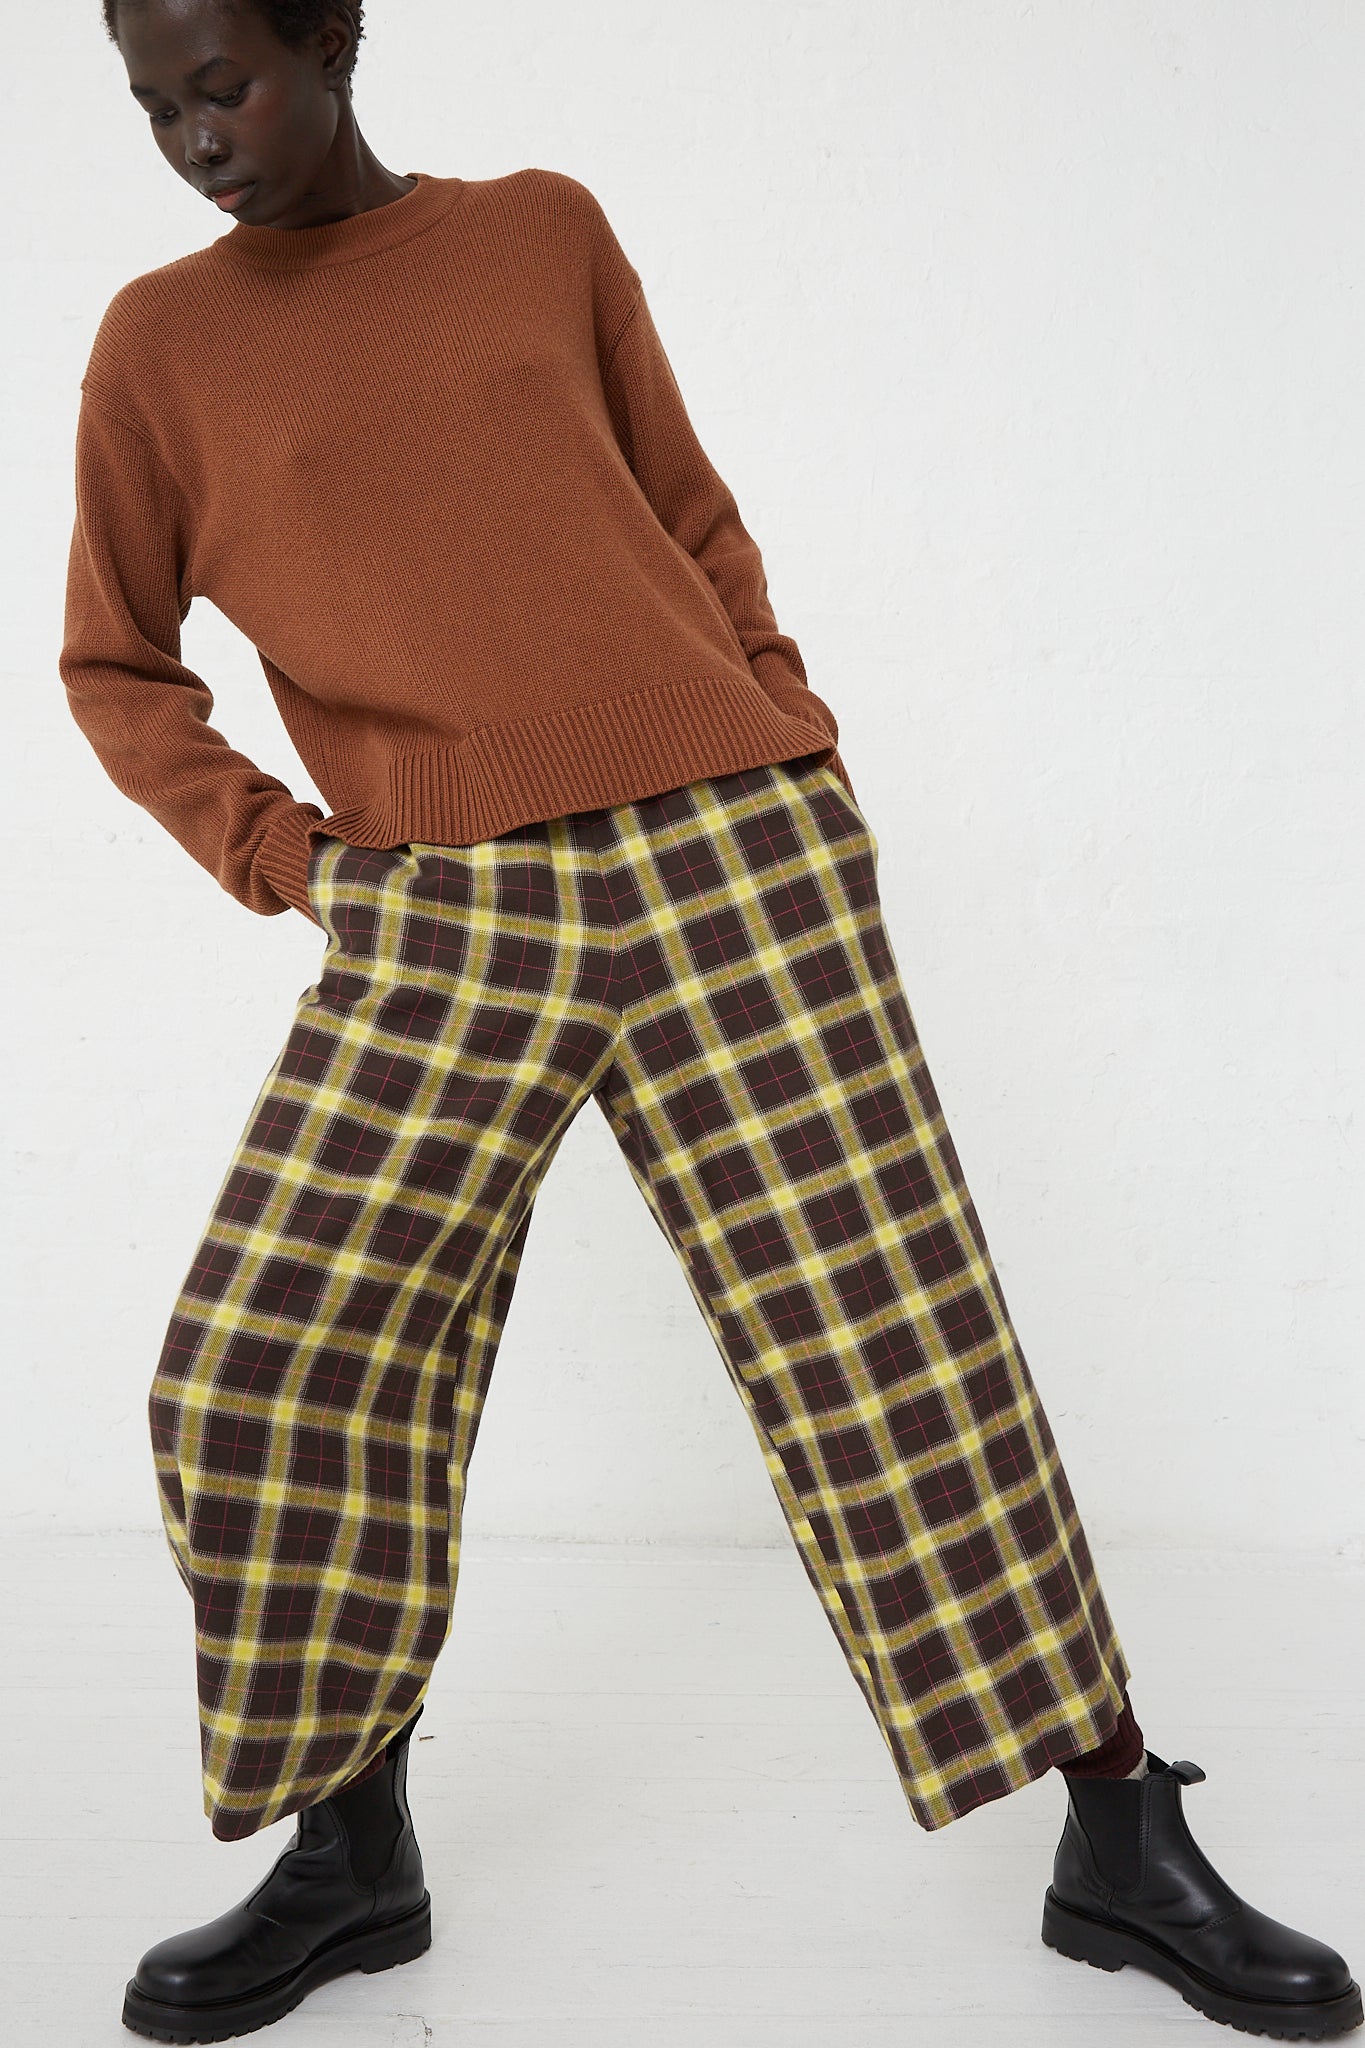 A woman wearing AVN's Easy Pant in Check Brown, Yellow and Pink paired with a relaxed fit brown sweater.